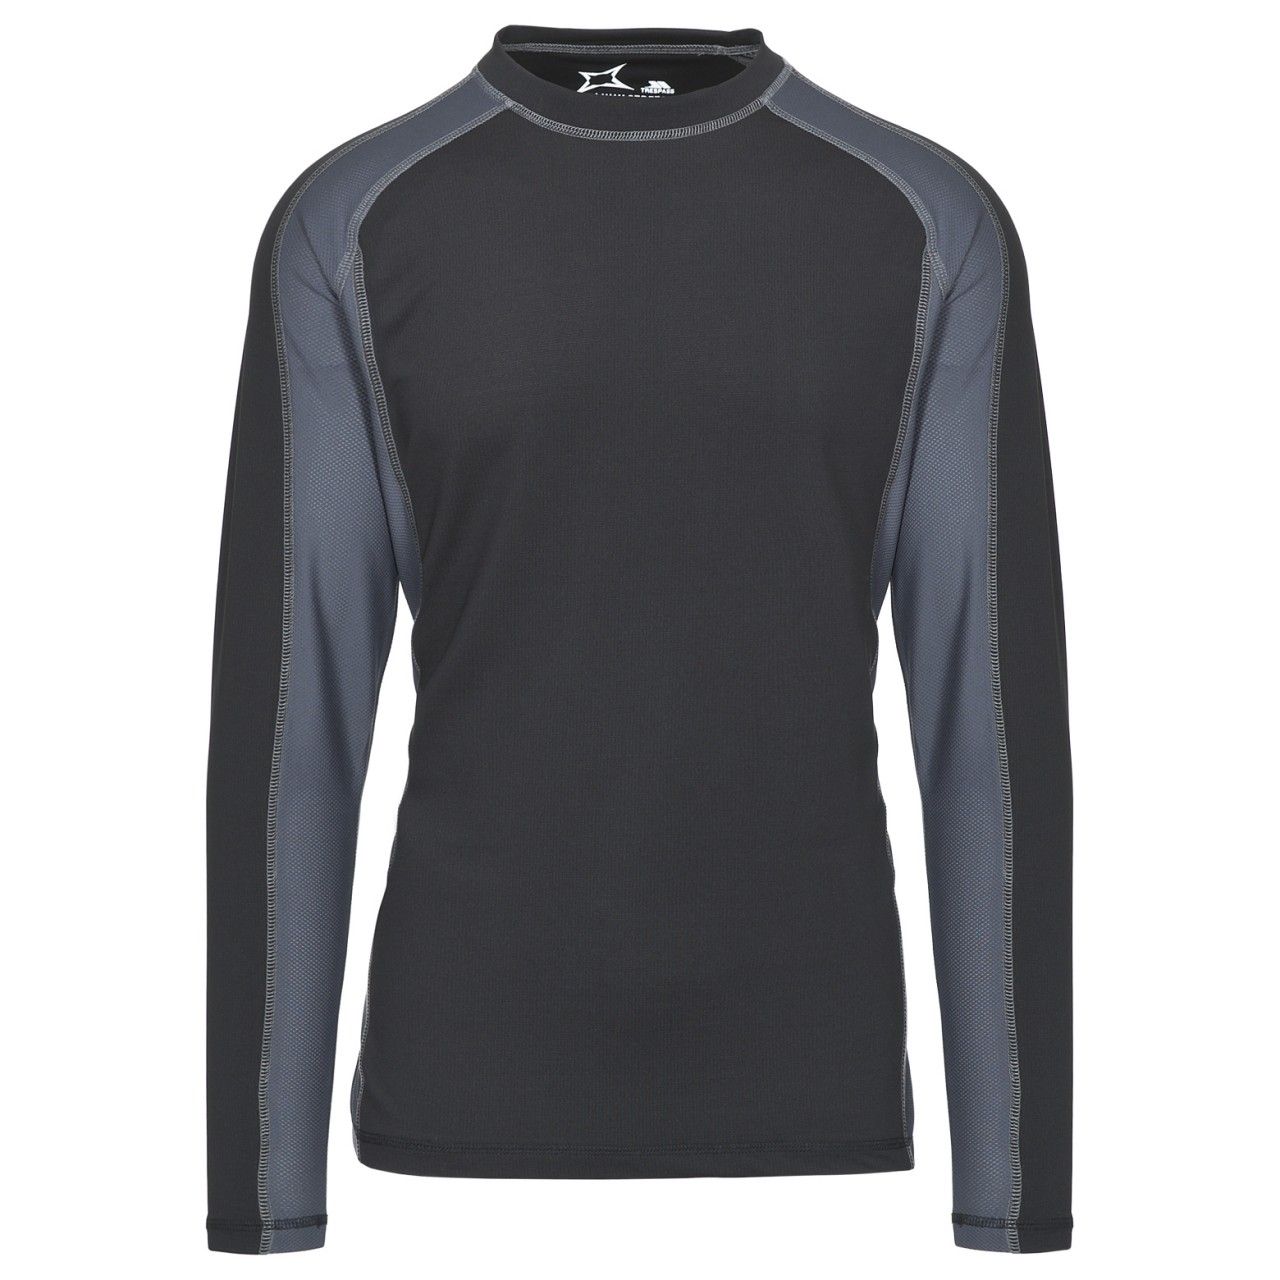 Active Long Sleeve T-Shirt. Round Neck. Polyester. Contrast Panels. Flat Lock Seams. Printed Trespass logo. Main 95% Polyester, 5% Elastane. Contrast 100% Polyester.